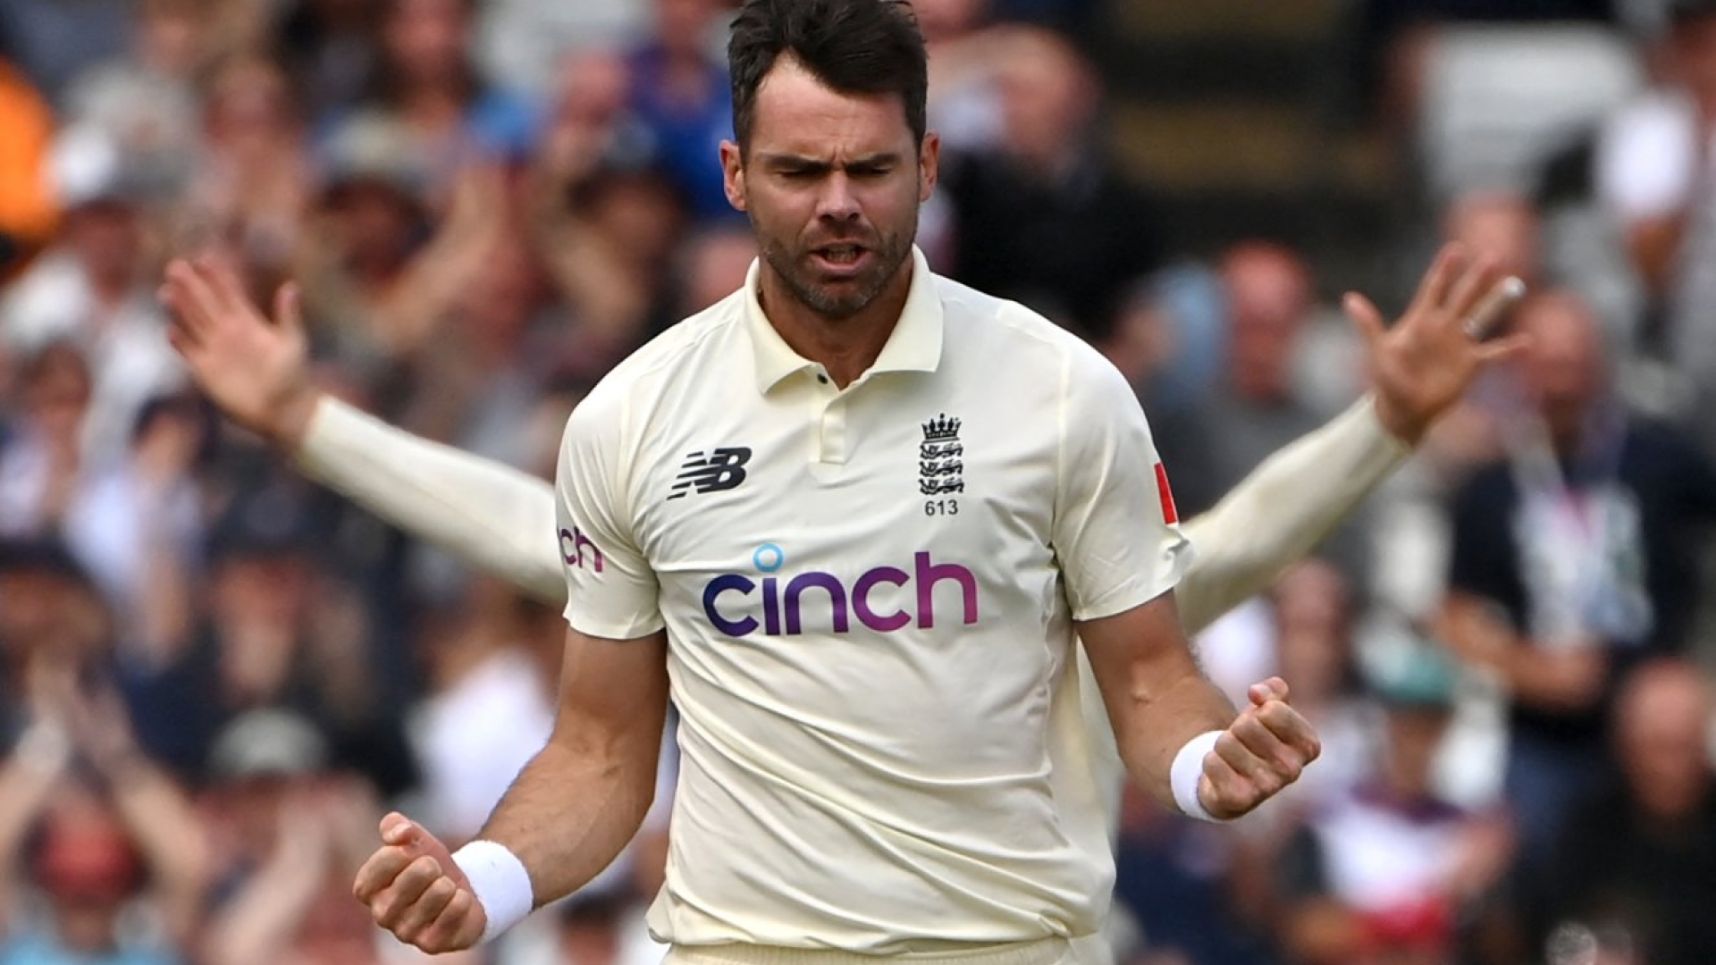 This group has been brilliant: Veteran Jimmy Anderson praises young English bowling attack